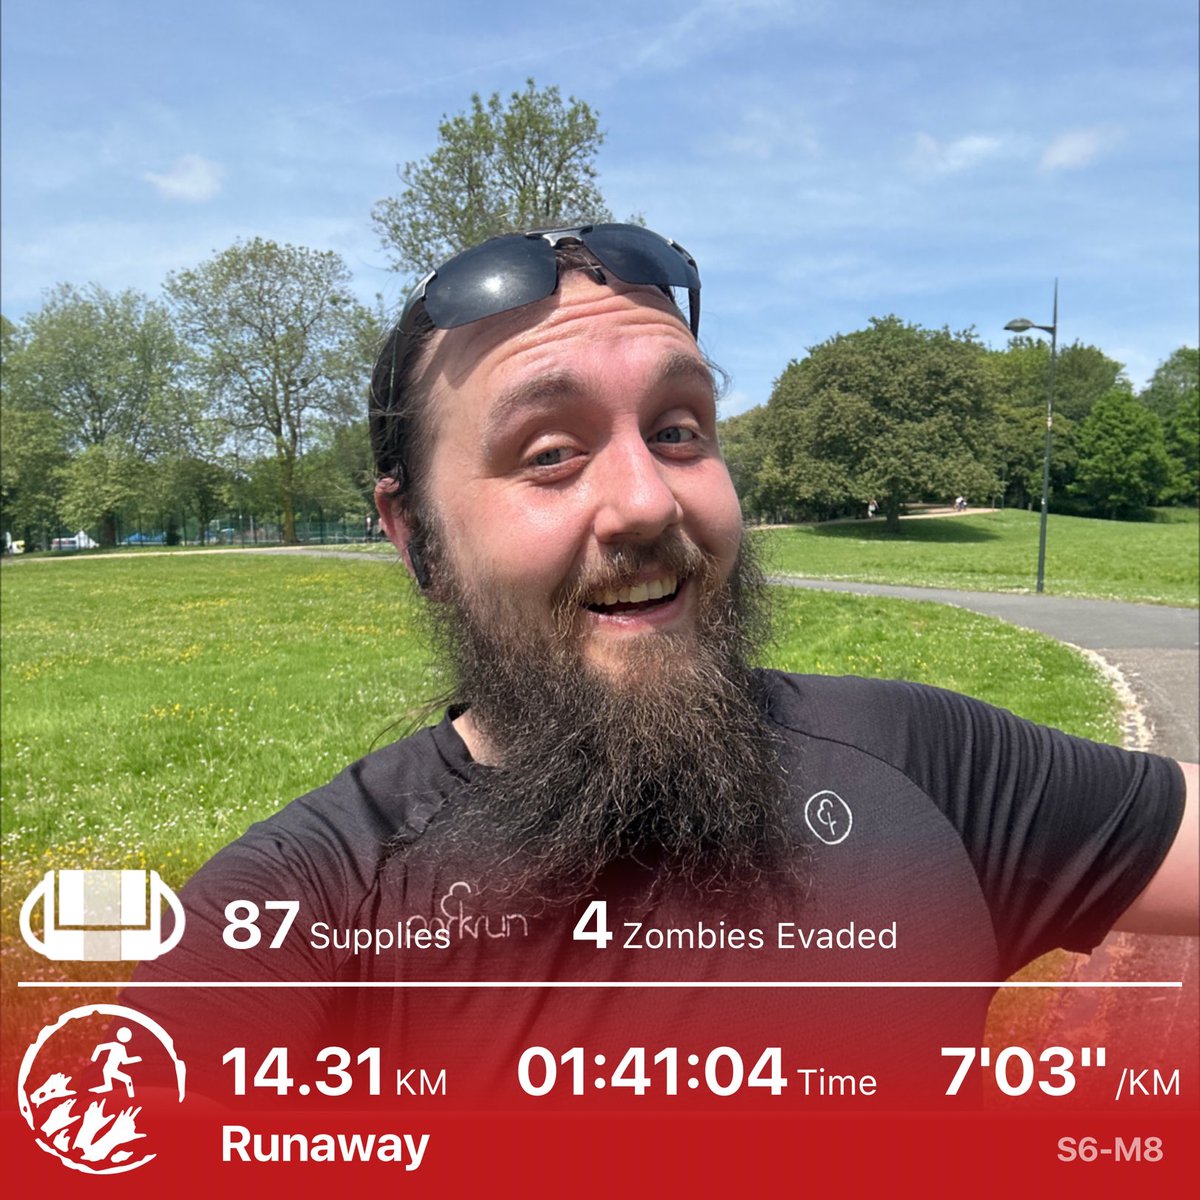 Hopped trains to meet in secret with a contact in Ministry territory #zombiesrun #pottersarf training 9 miles today might be my last run for a while should probably rest and heal my legs. Fun espionage mission in ZR today though!